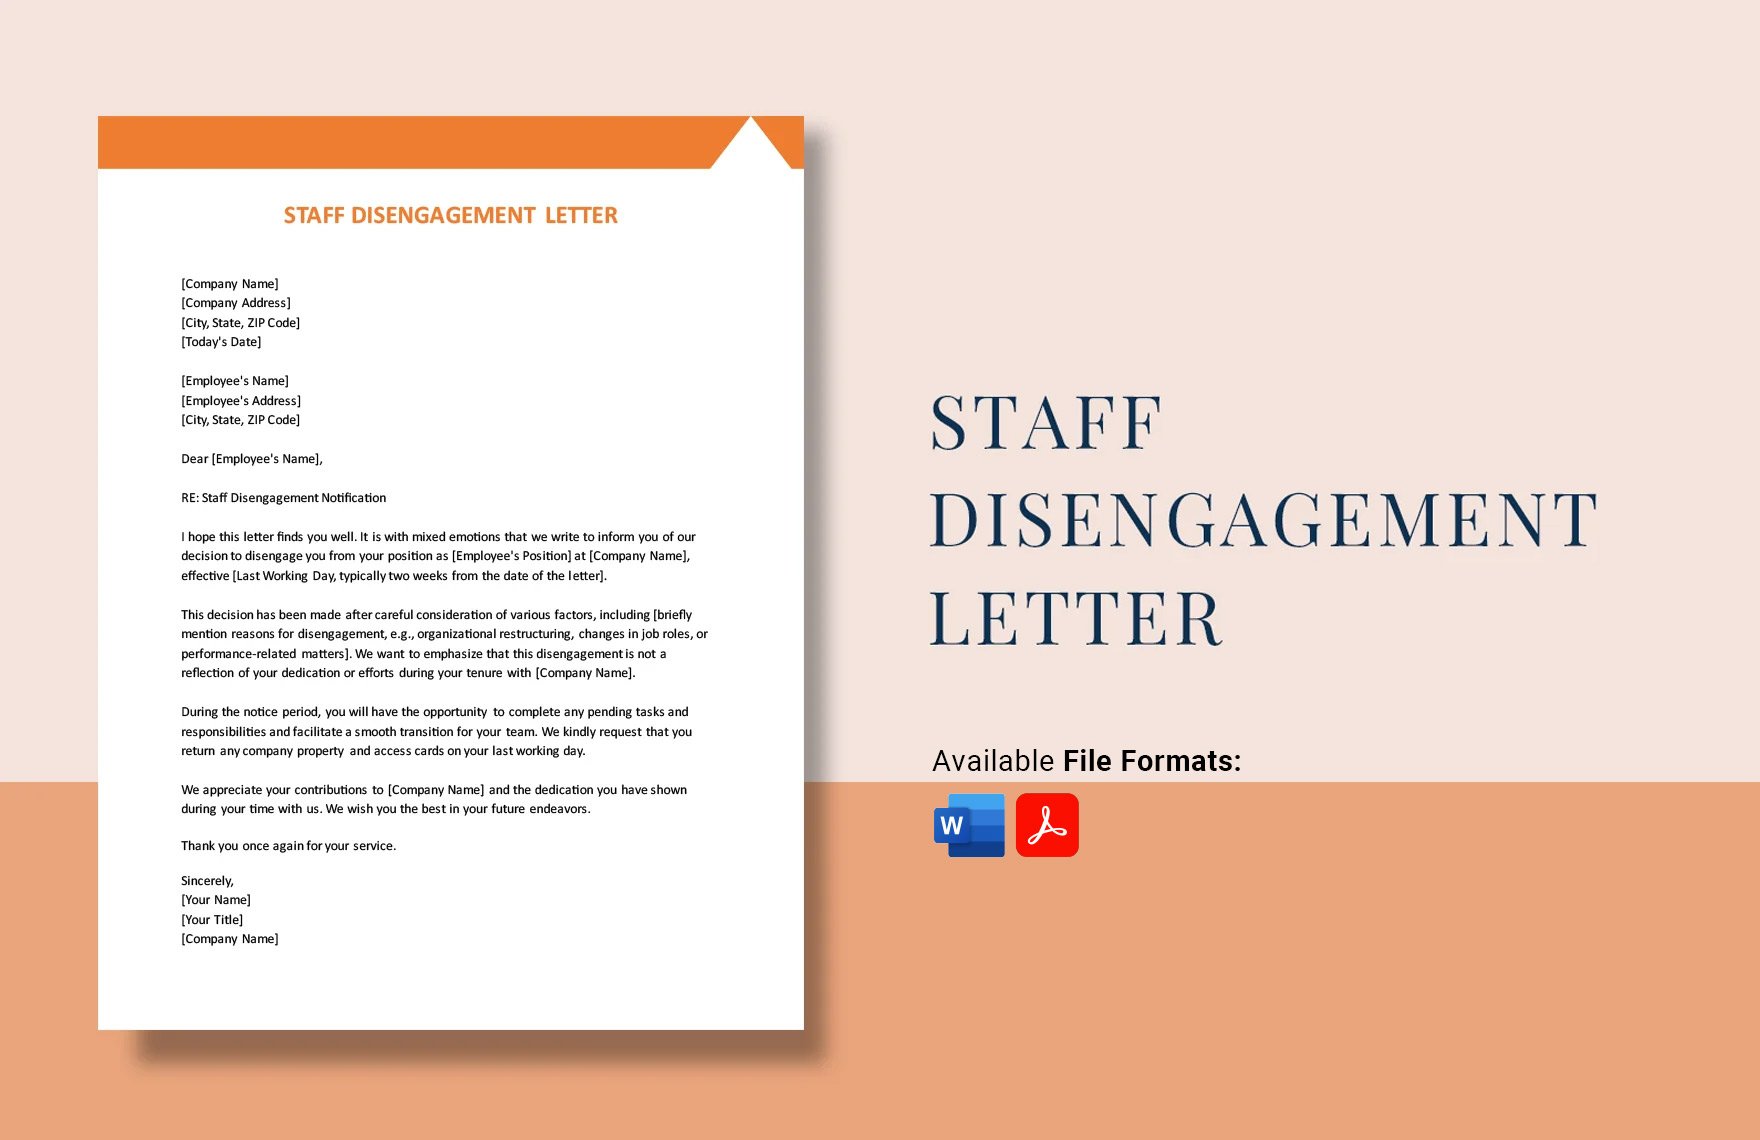 Staff Disengagement Letter in Word, PDF